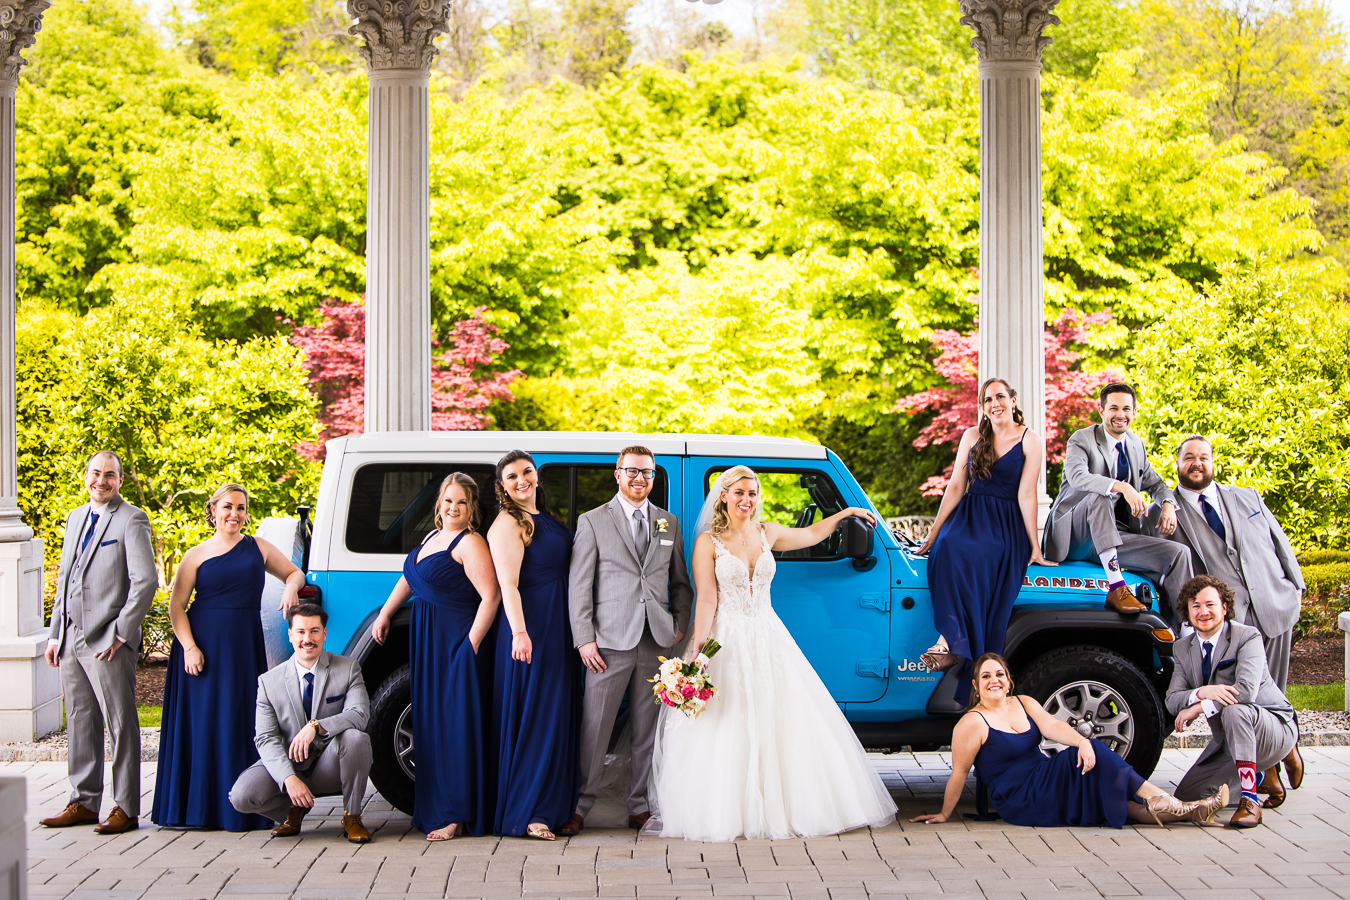 creative NJ Wedding Photographer, lisa rhinehart, captures this fun, creative wedding party image of the bride and groom standing in front of their bright blue jeep as they pose with it